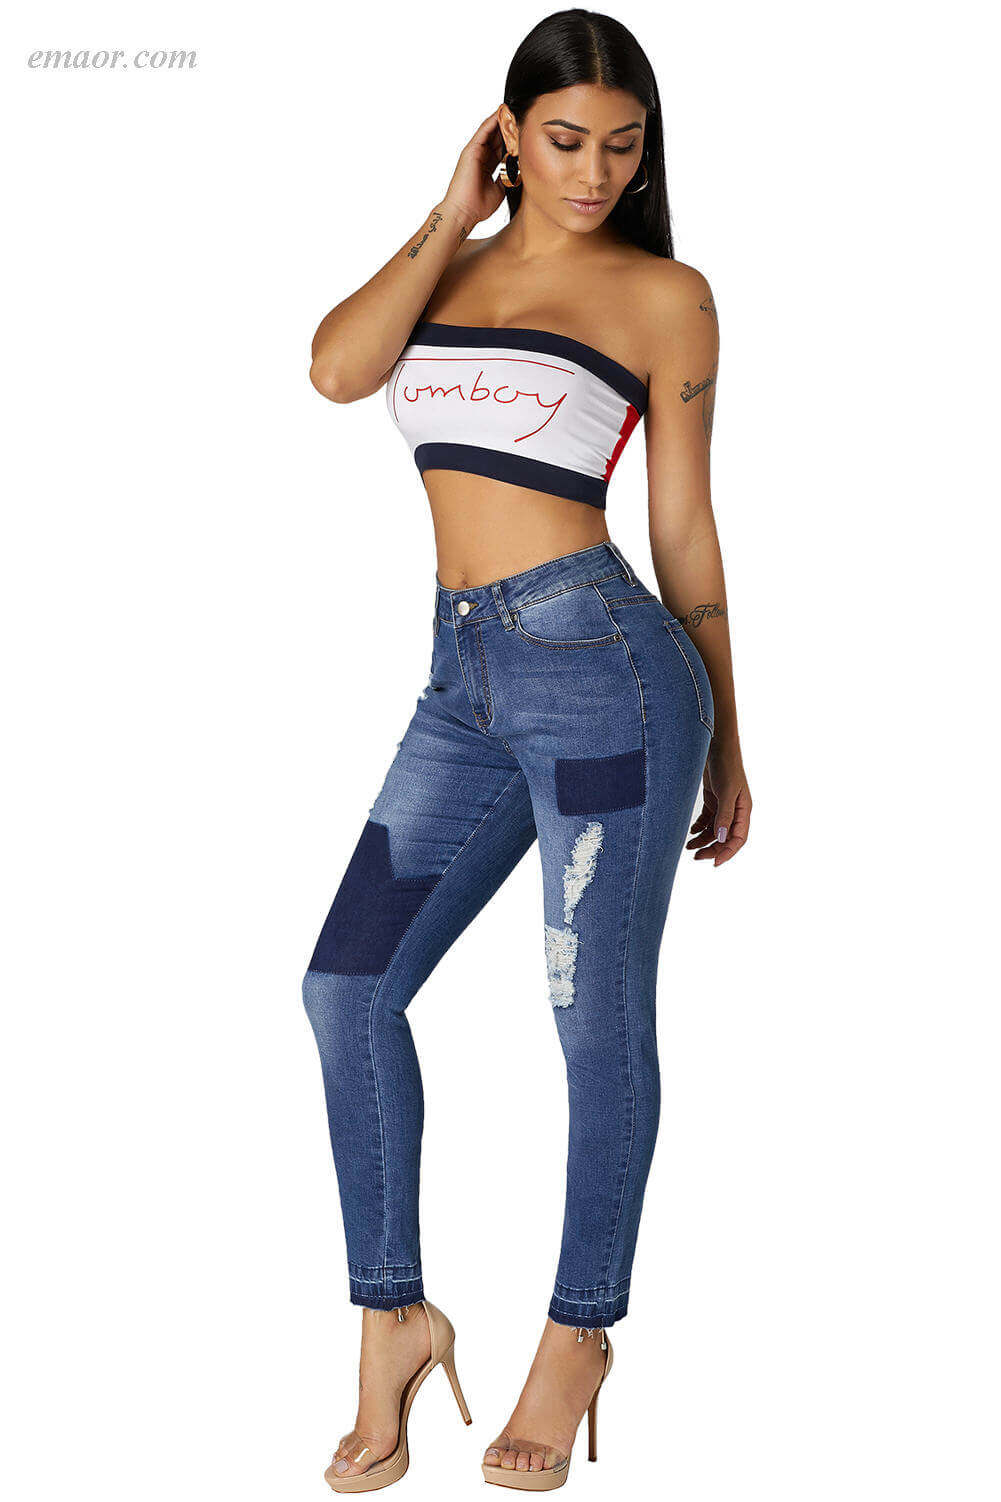 Hot Women‘s Dividual Patched Ripped Skinny Jeans Online 